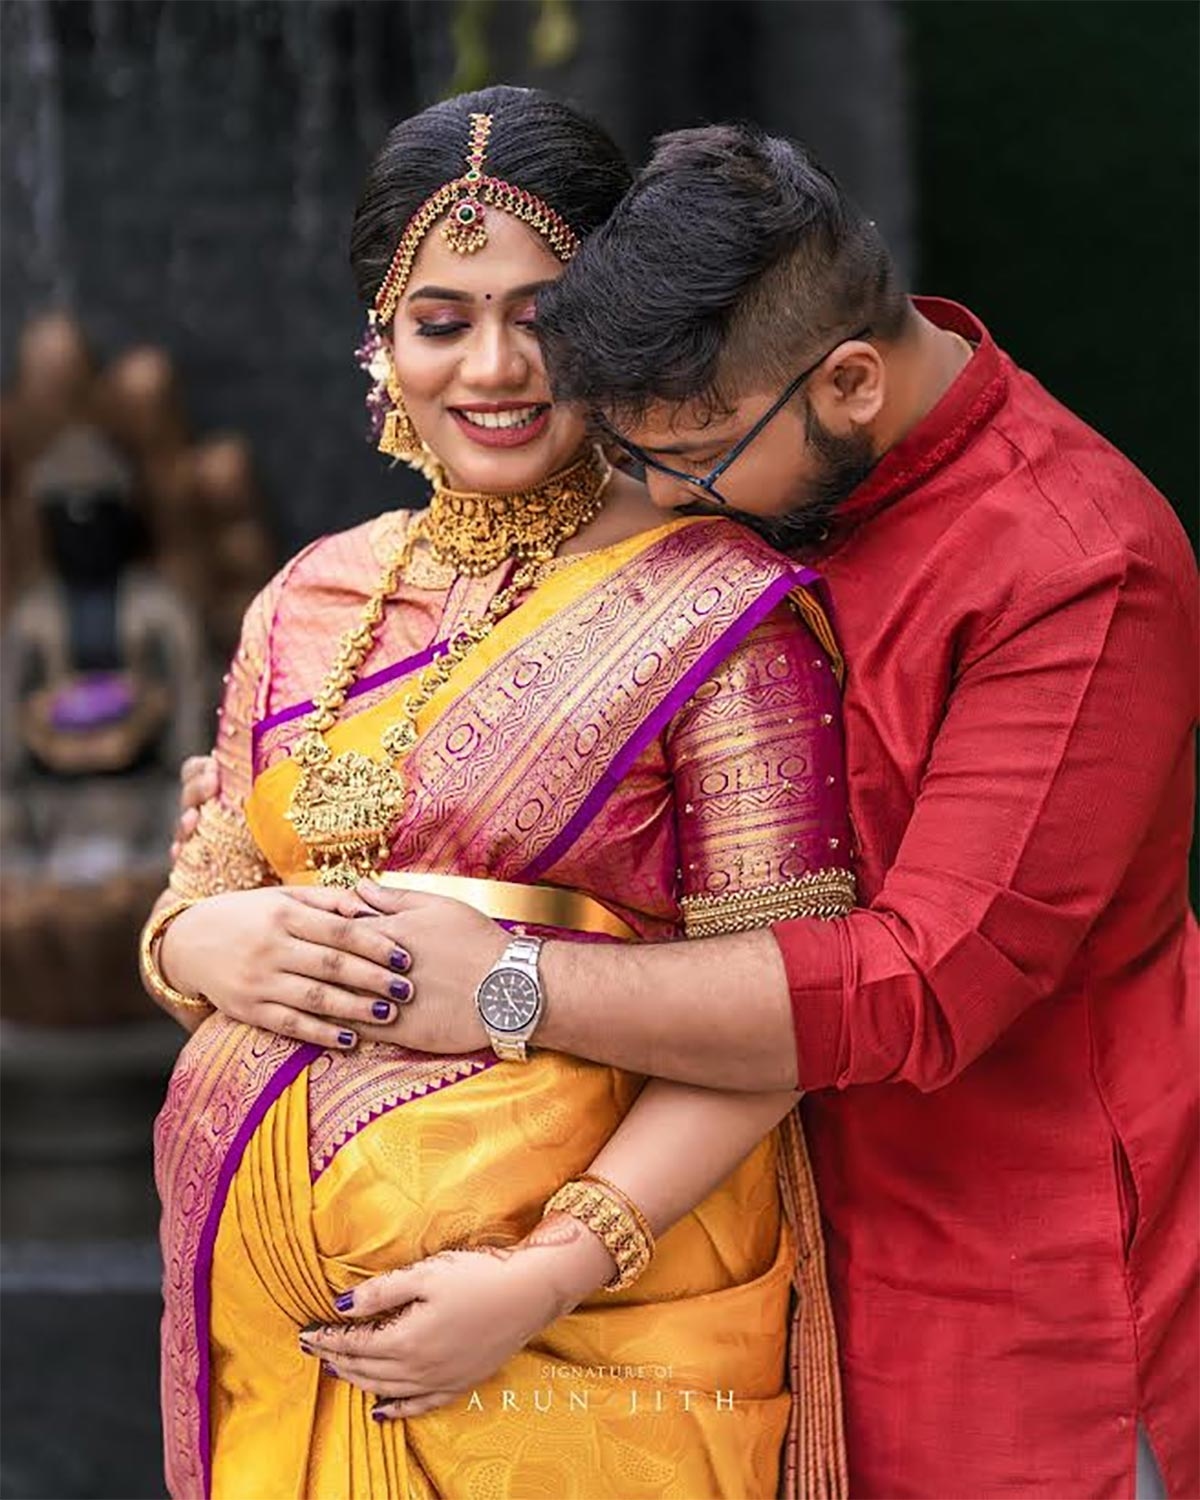 Mom-to-be Athira Madhav radiates pregnancy glow in these pictures